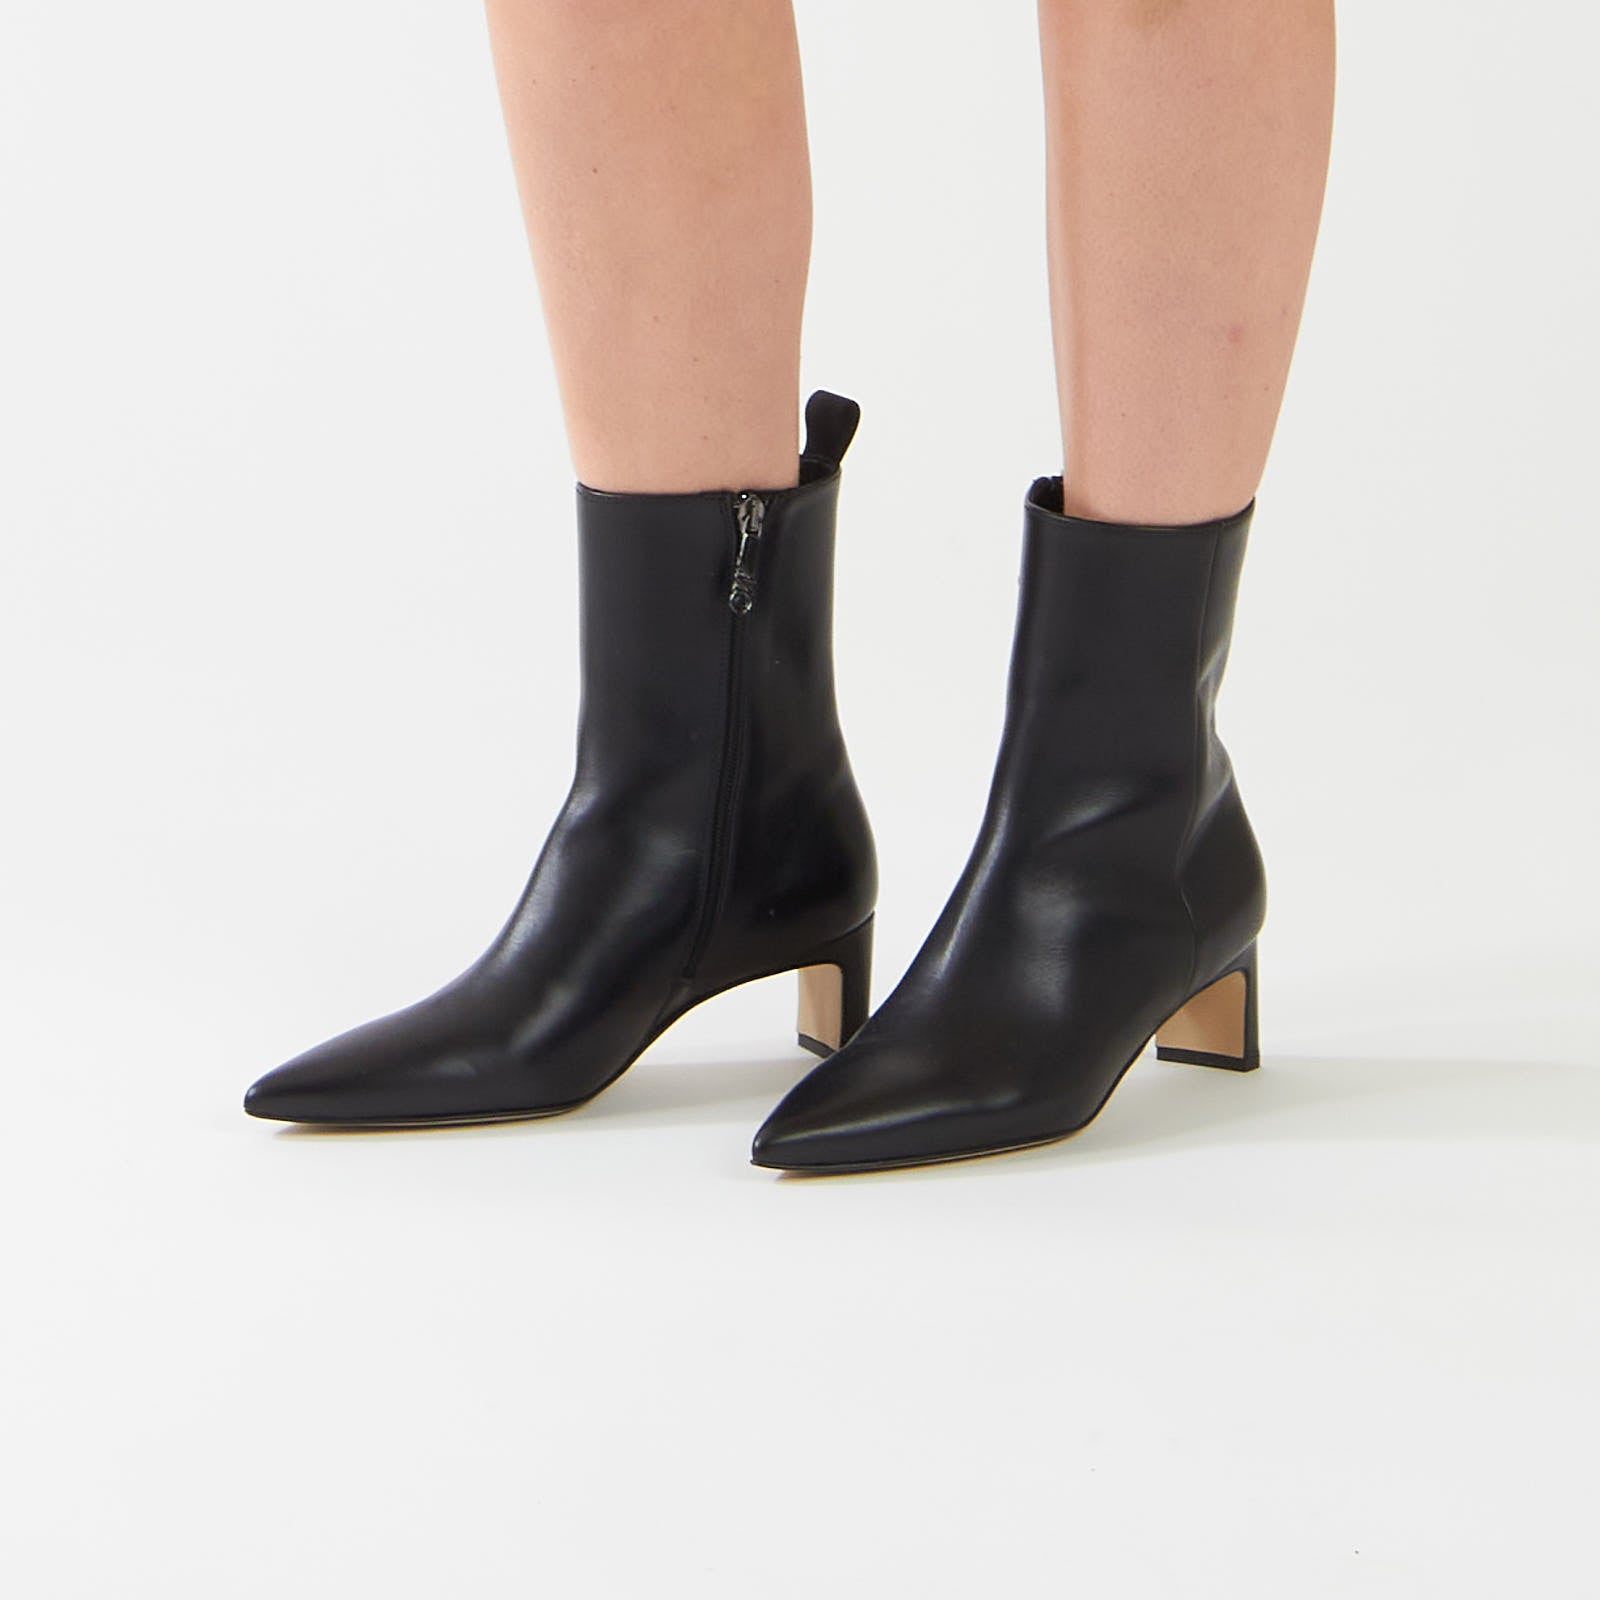 Black Pointed Leather Heeled Boots